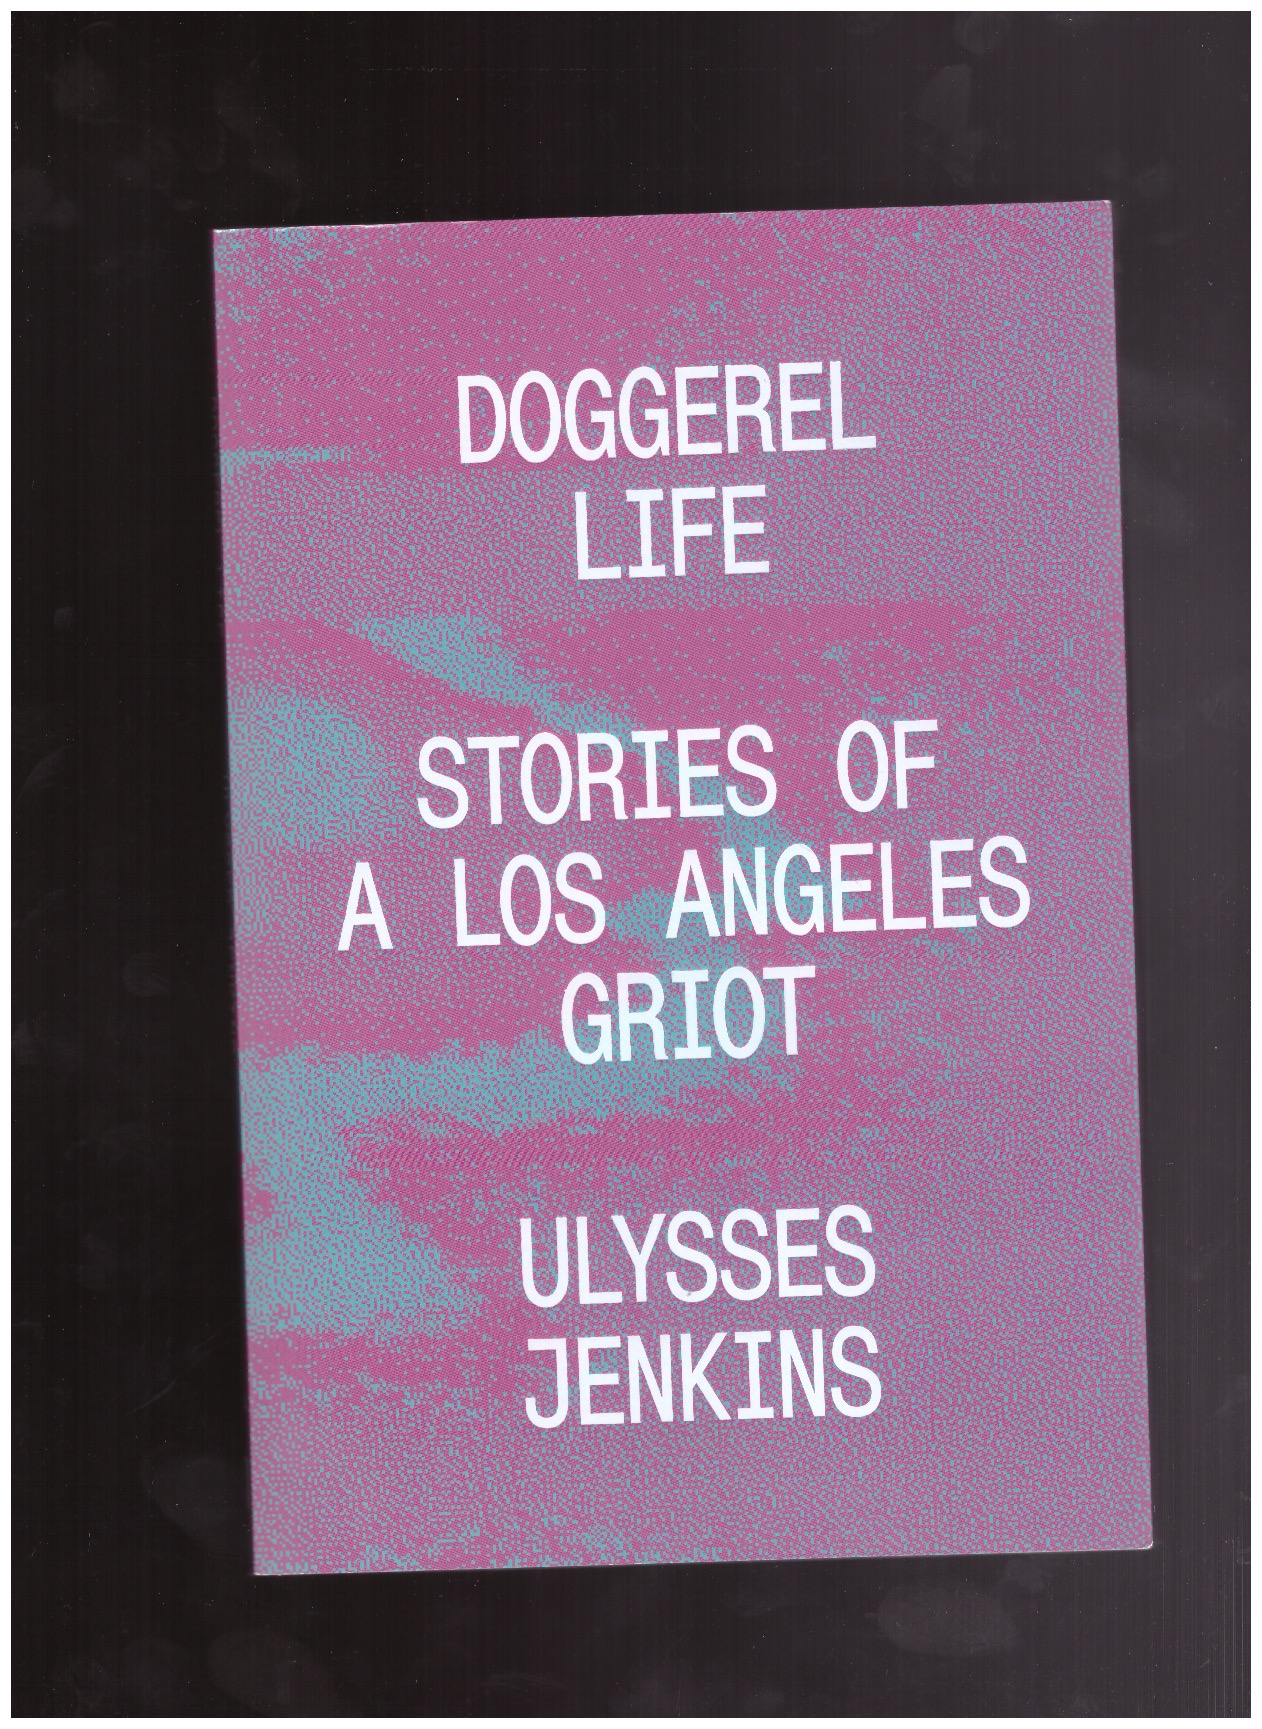 JENKINS, Ulysses - Doggerel Life: Stories of a Los Angeles Griot